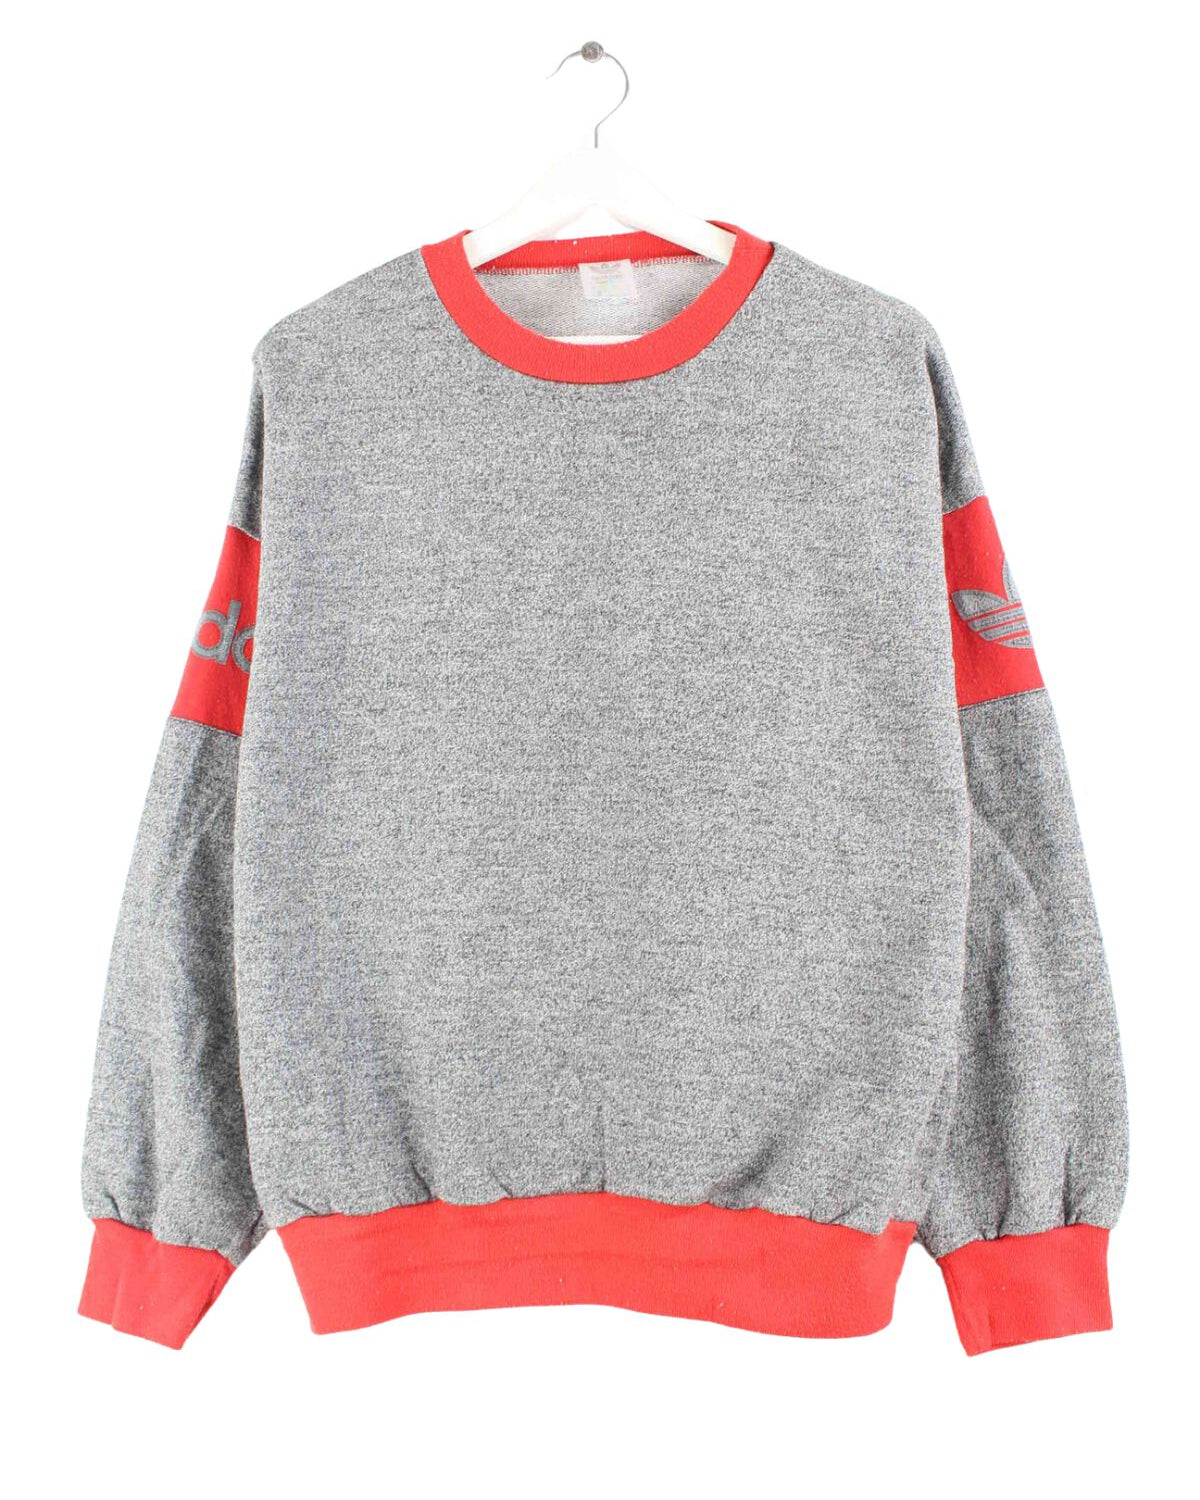 Adidas 80s Vintage Sweater Grau S (front image)